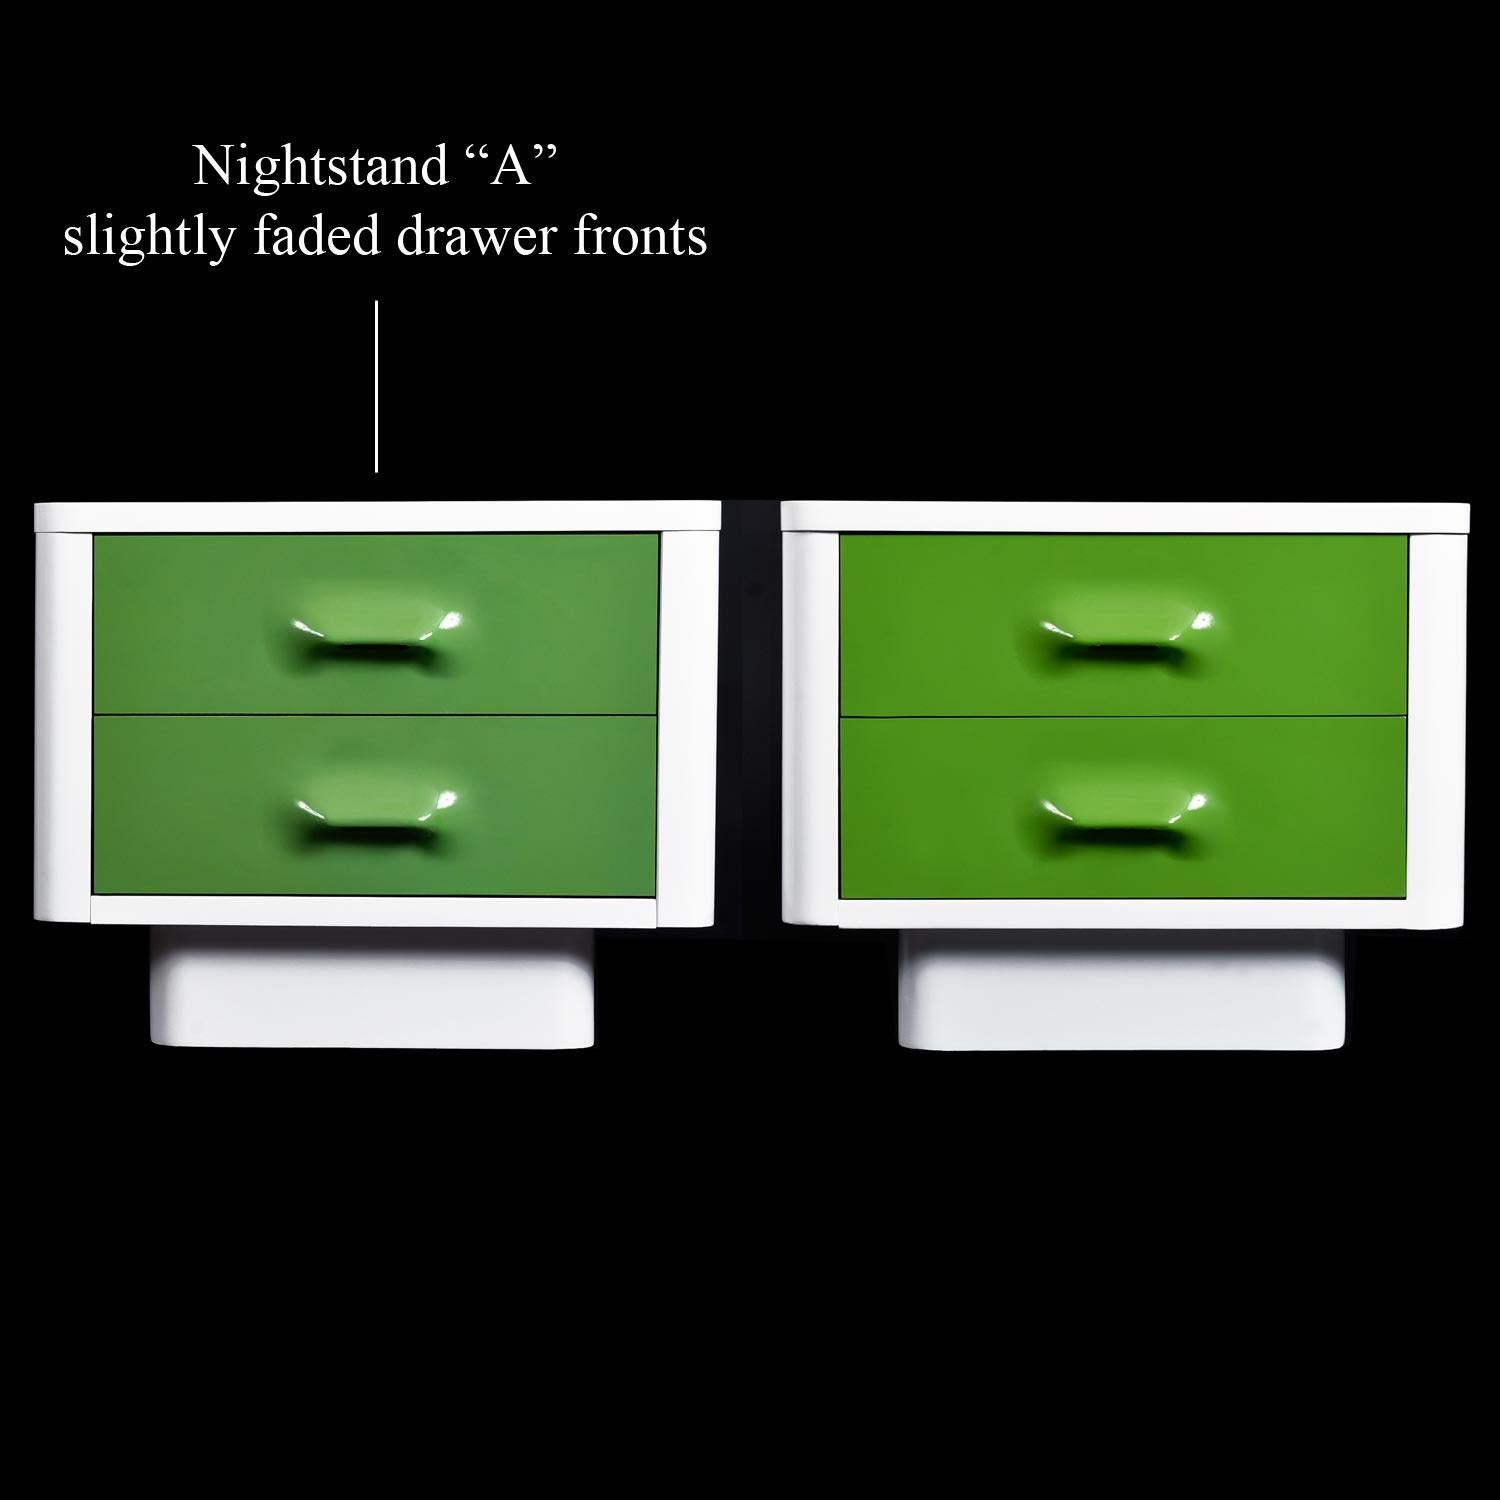 Why are the green drawer fronts different tones? Good question. Nightstand 